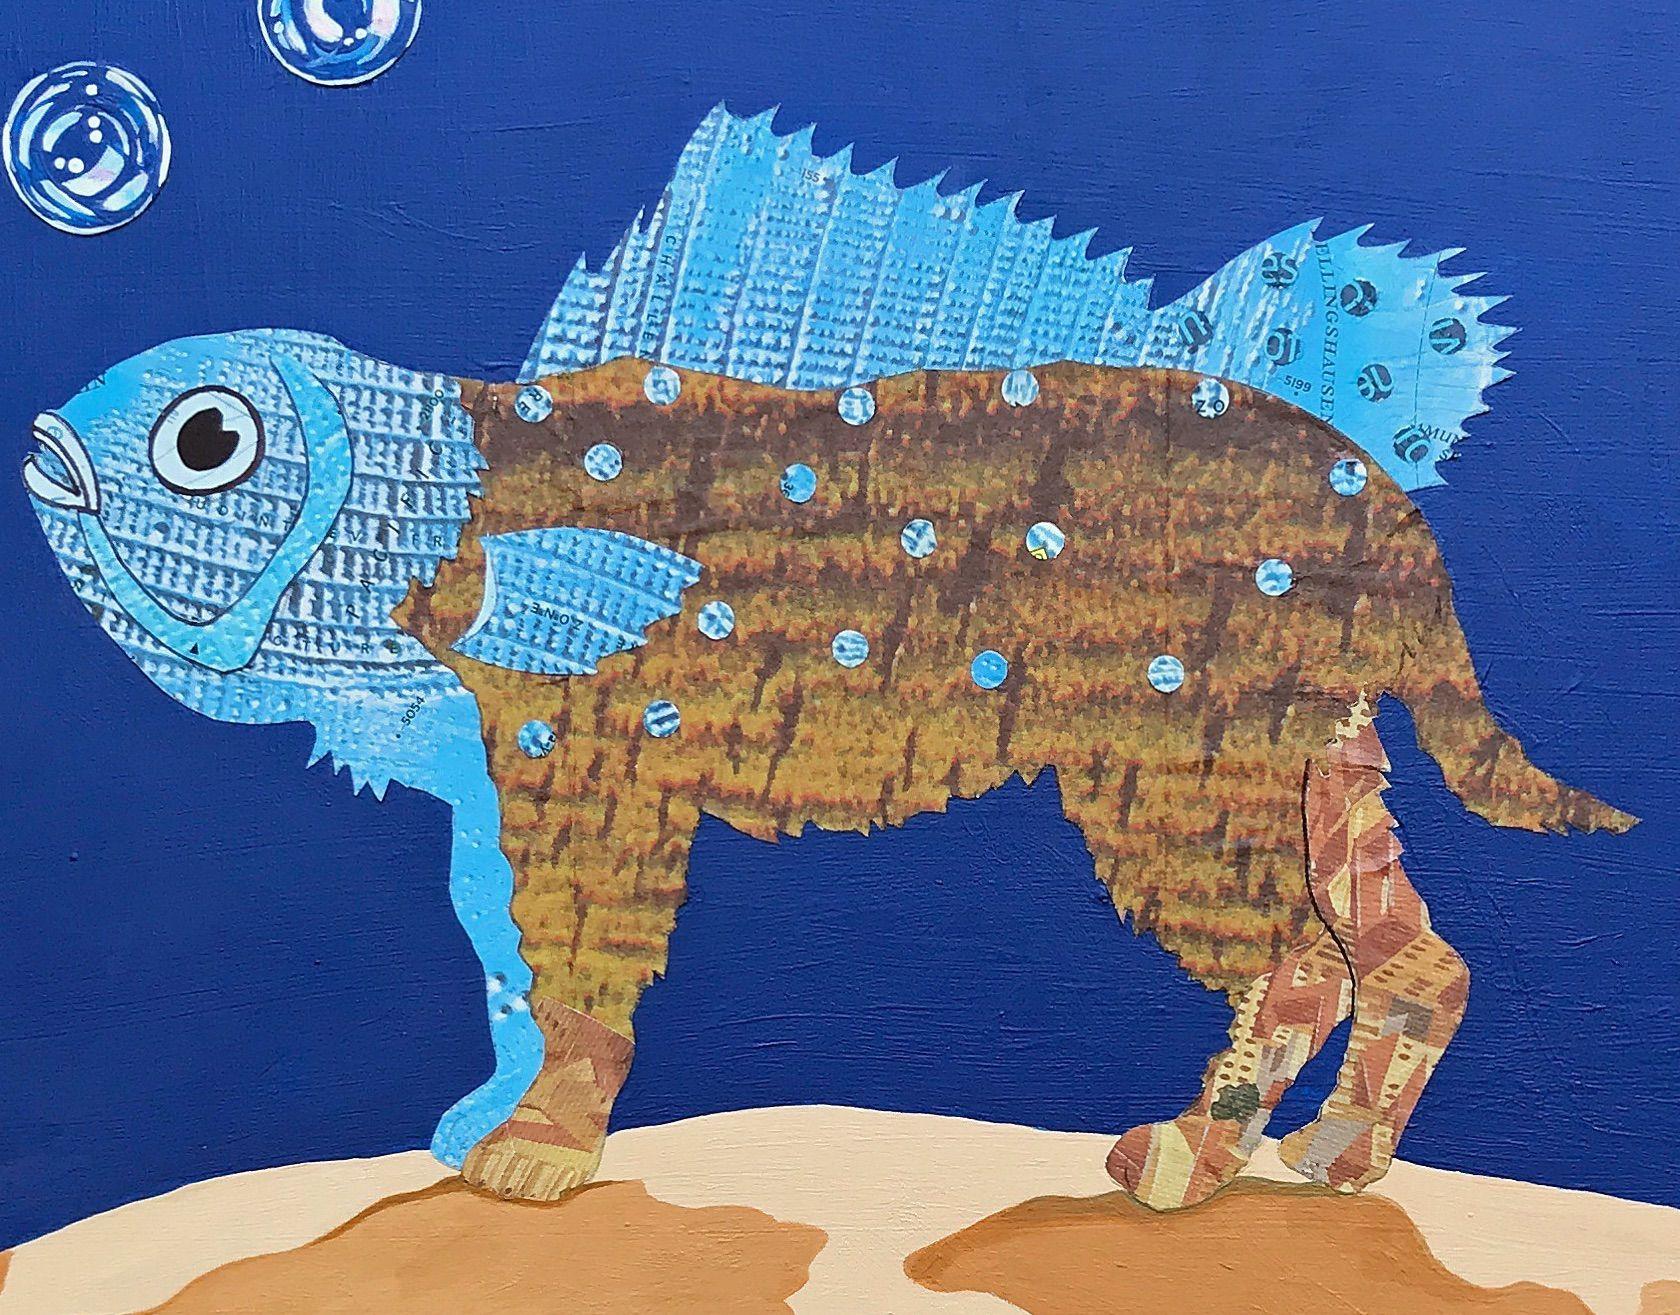 Hybrids Make the Best Pets, Mixed Media on Wood Panel - Surrealist Mixed Media Art by Nancy Goodman Lawrence